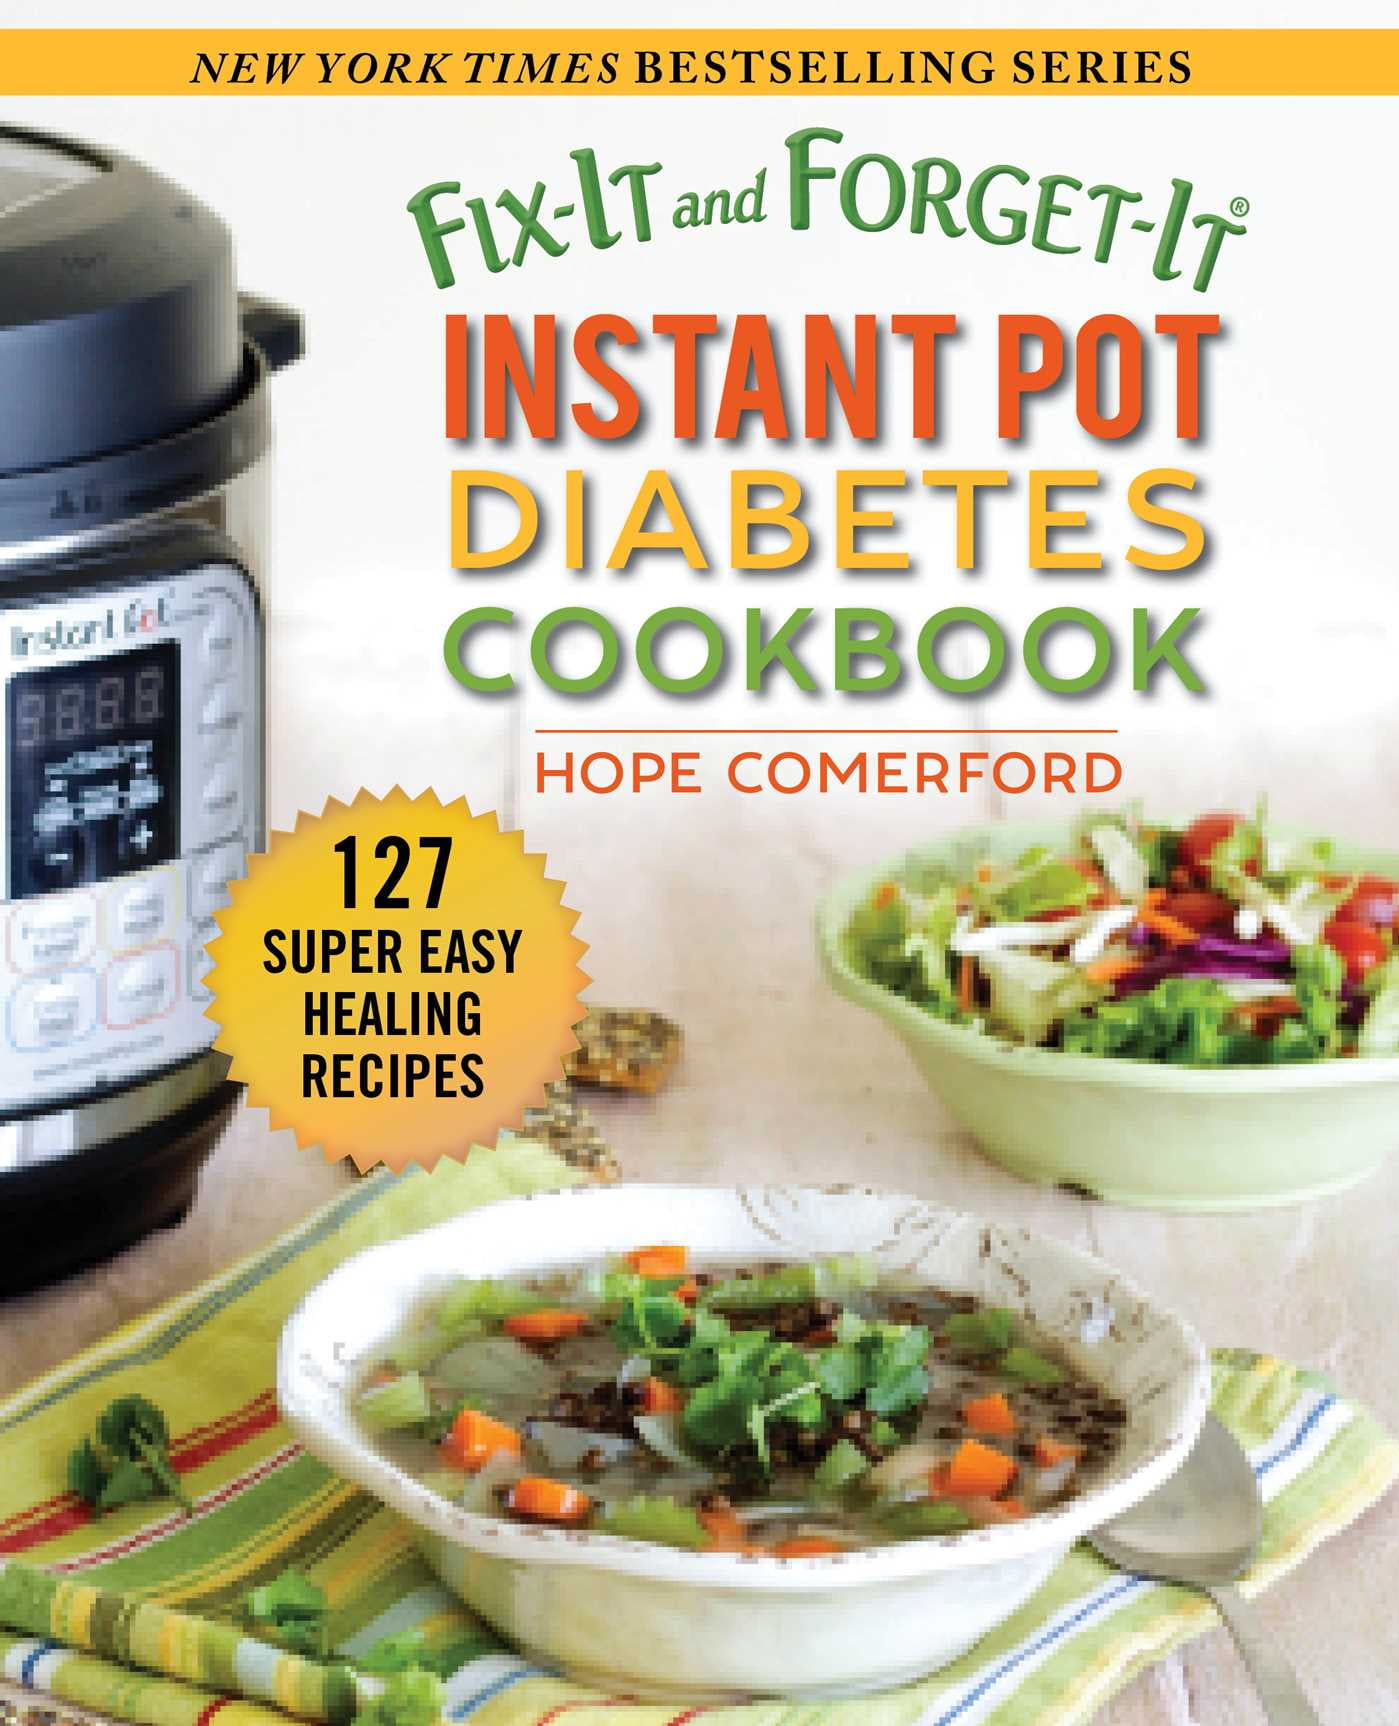 NYT Cooking - How to Use an Instant Pot